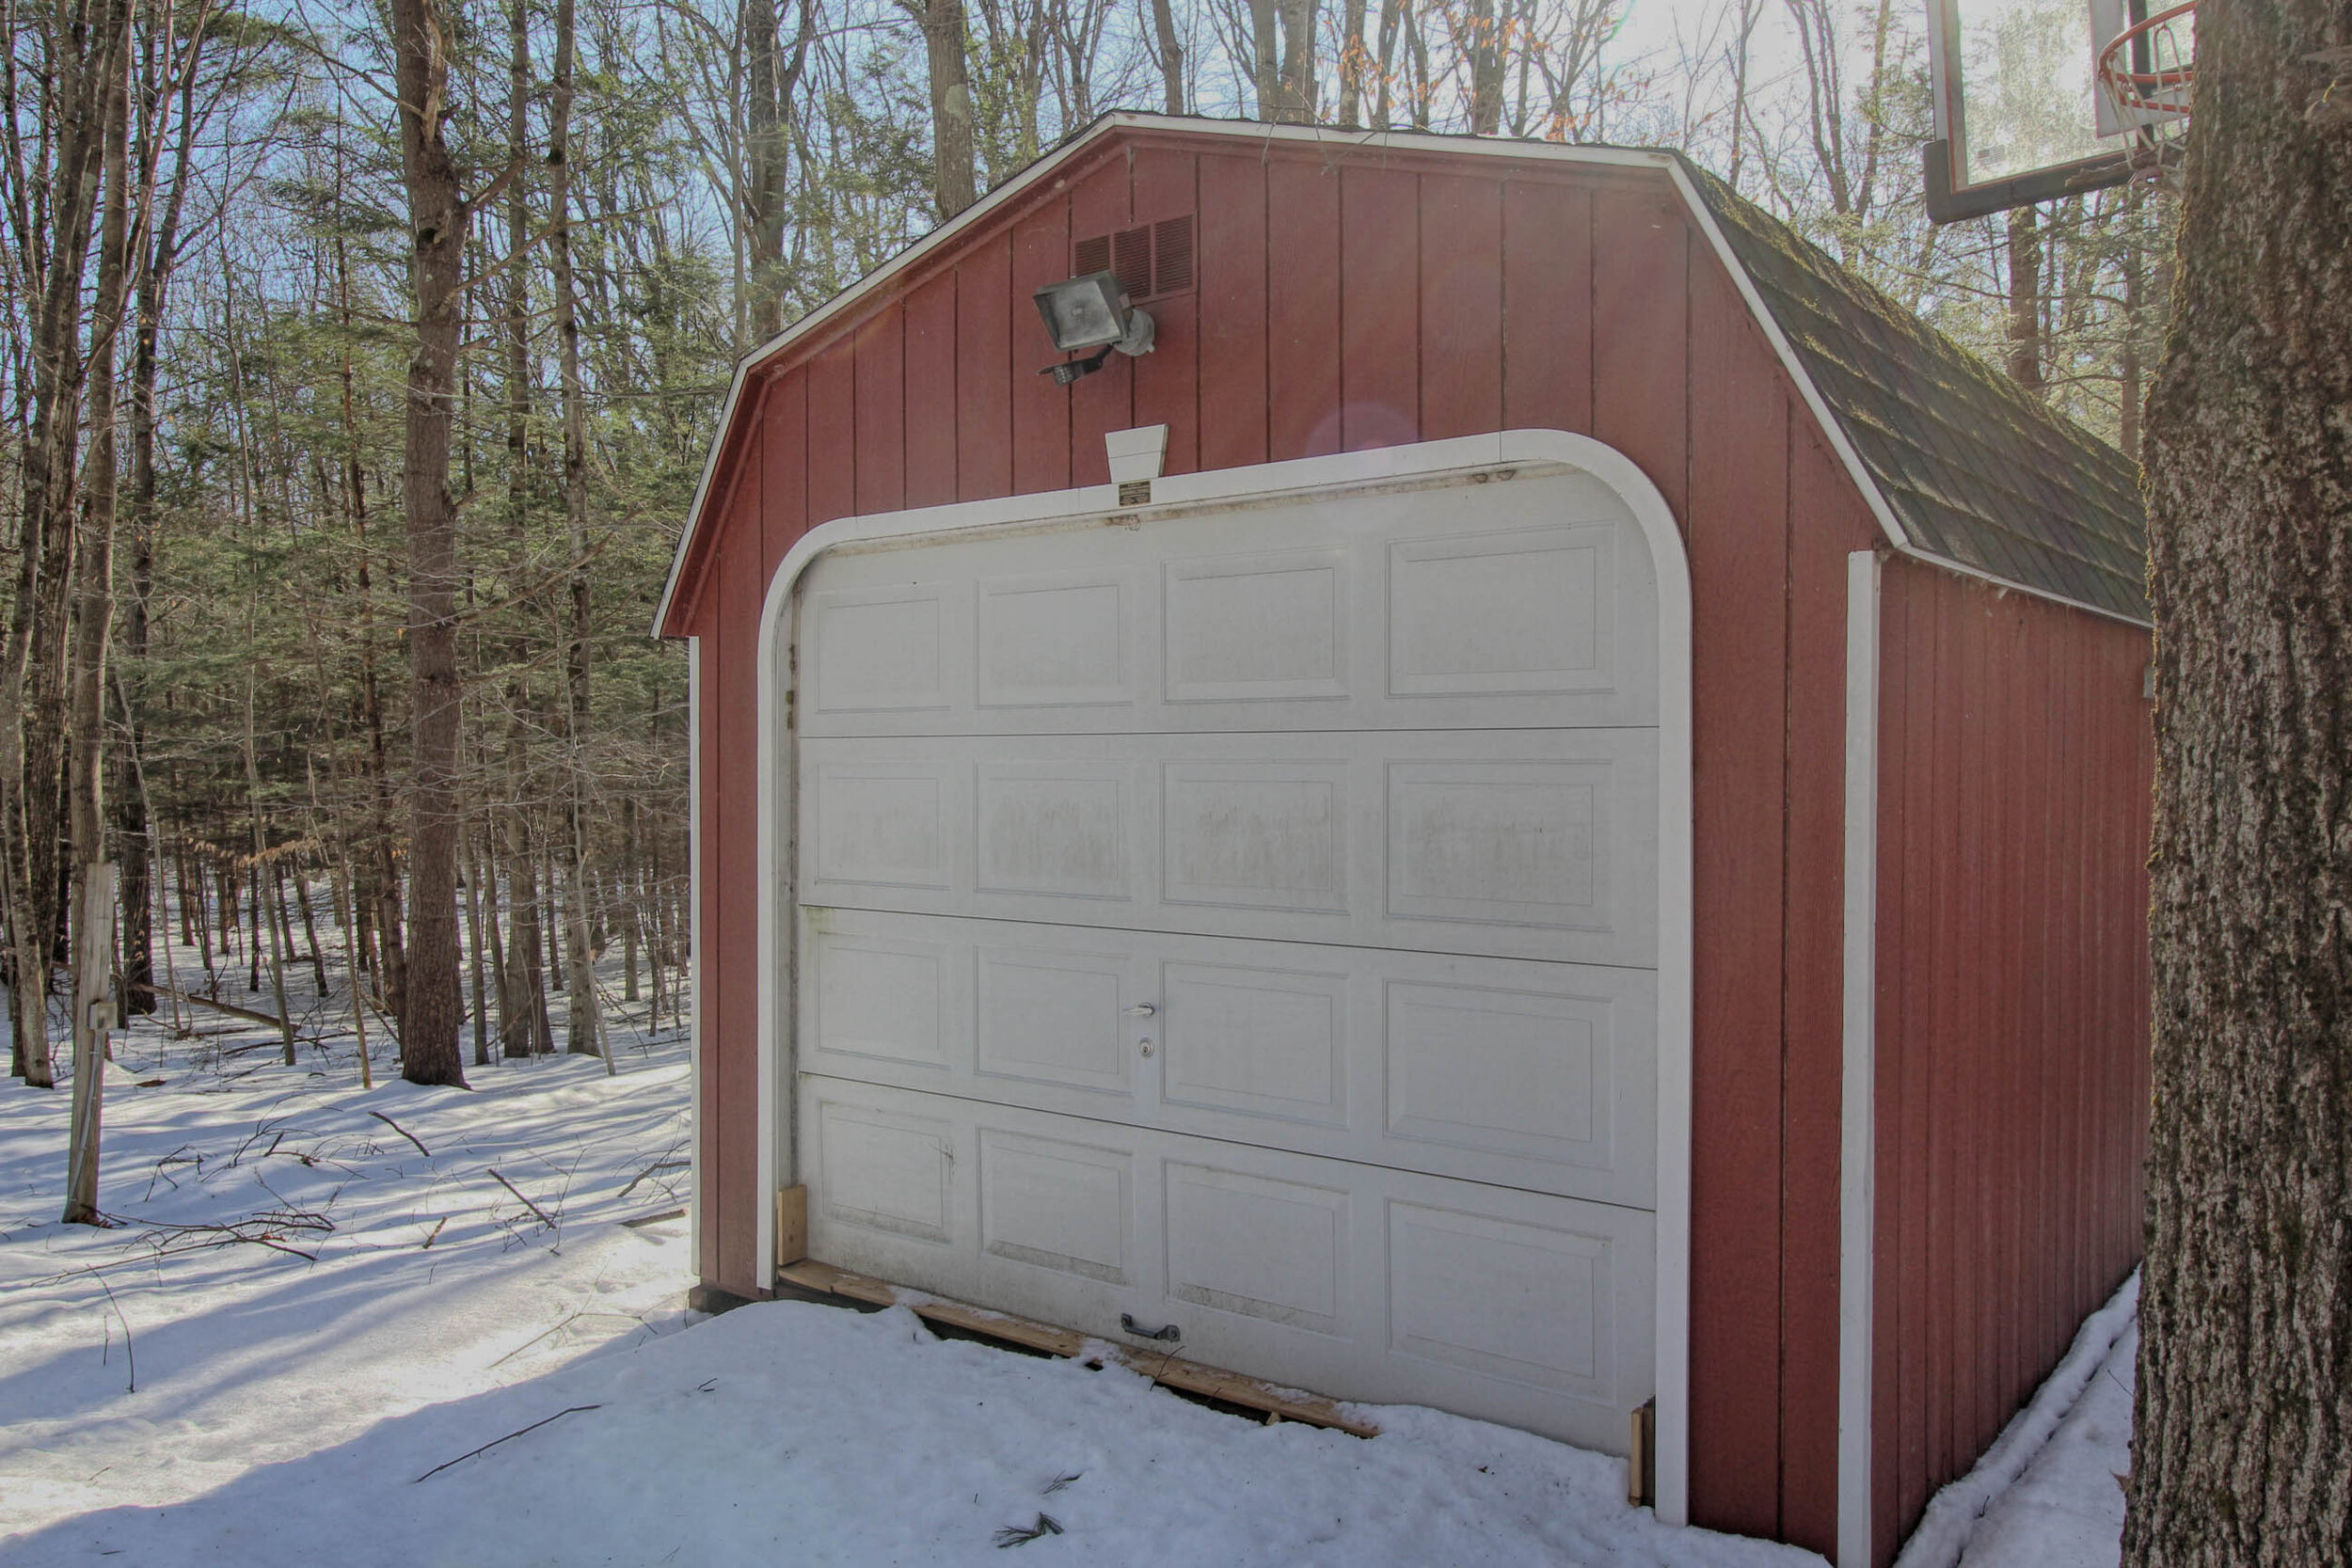  Single, red garage detached from the other garage with white door. 